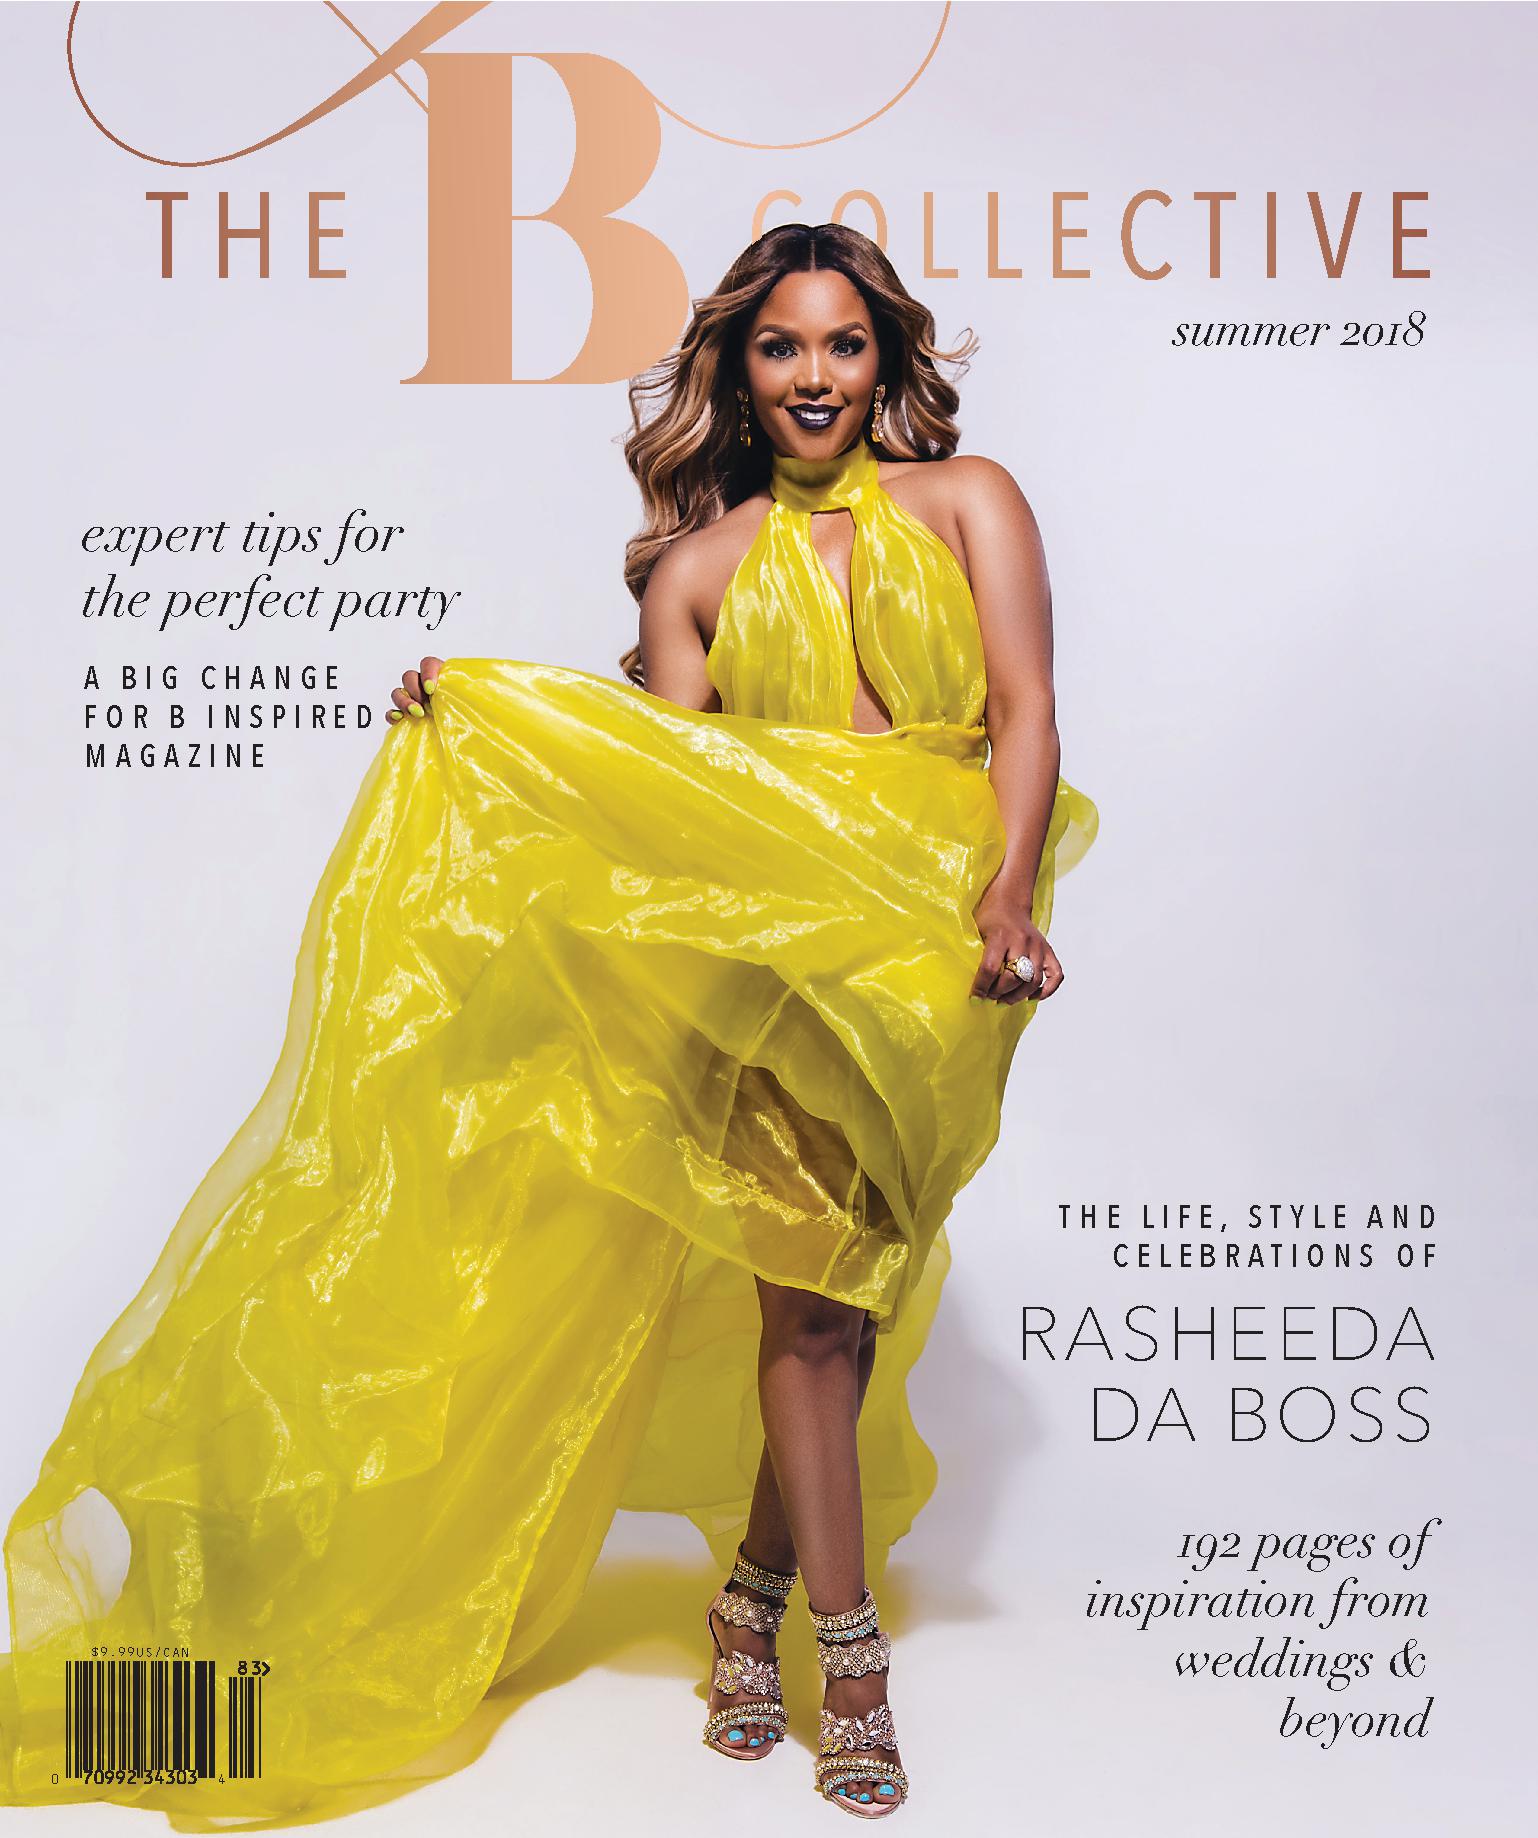 The B Collective Summer 2018 Cover.jpg